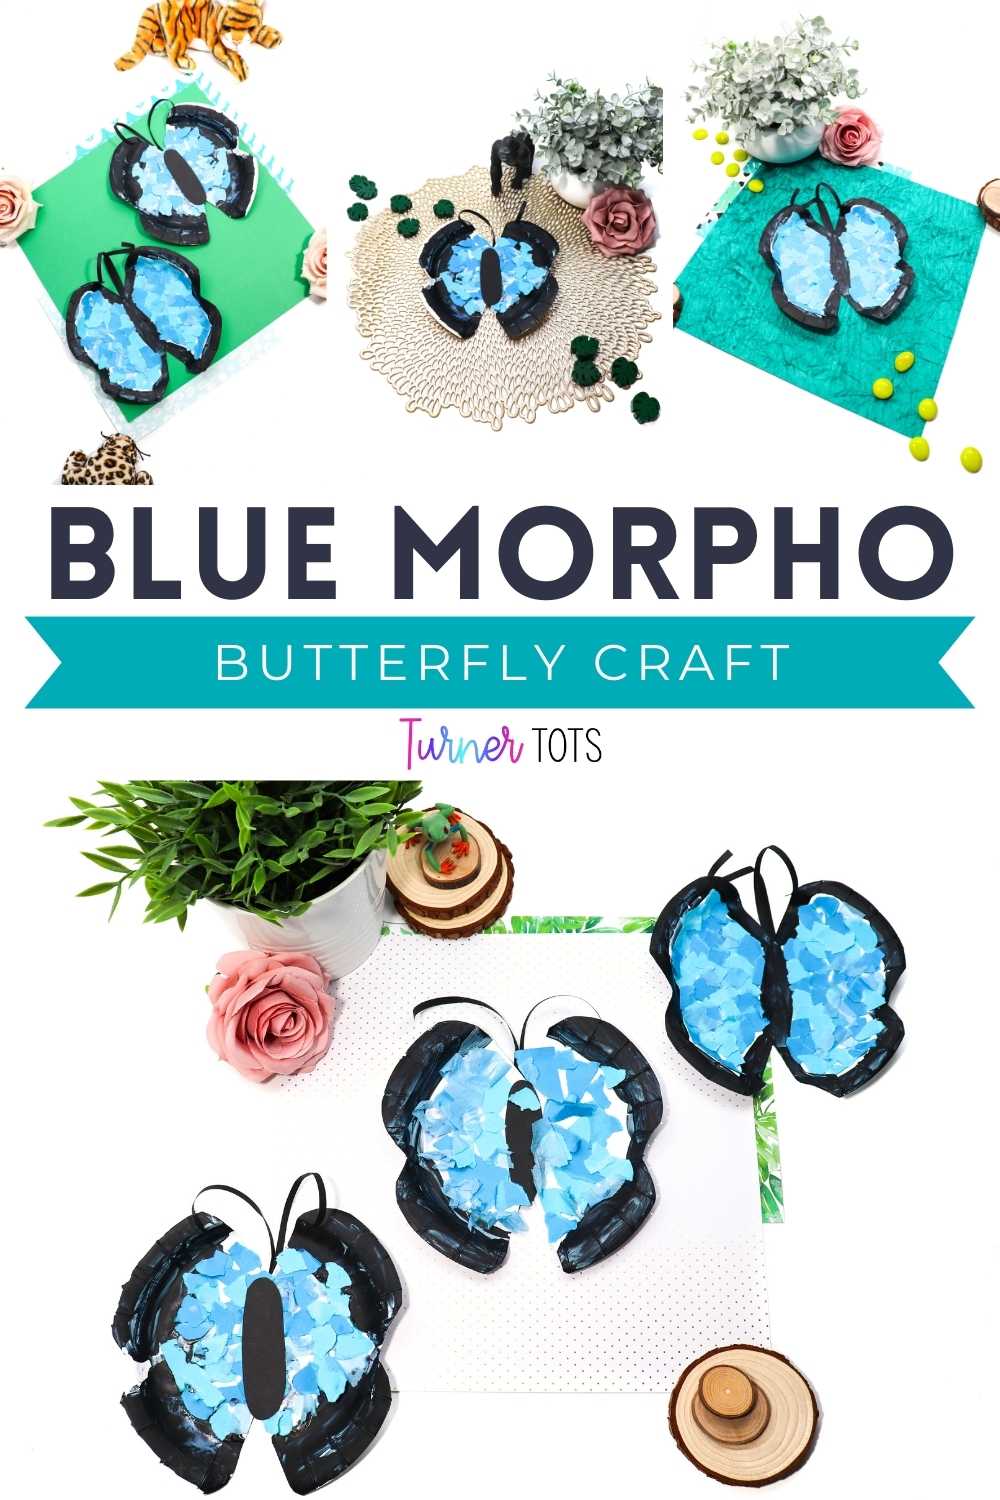 Blue morpho butterflies made with ripped paper on a paper plate as one of our jungle art activities.